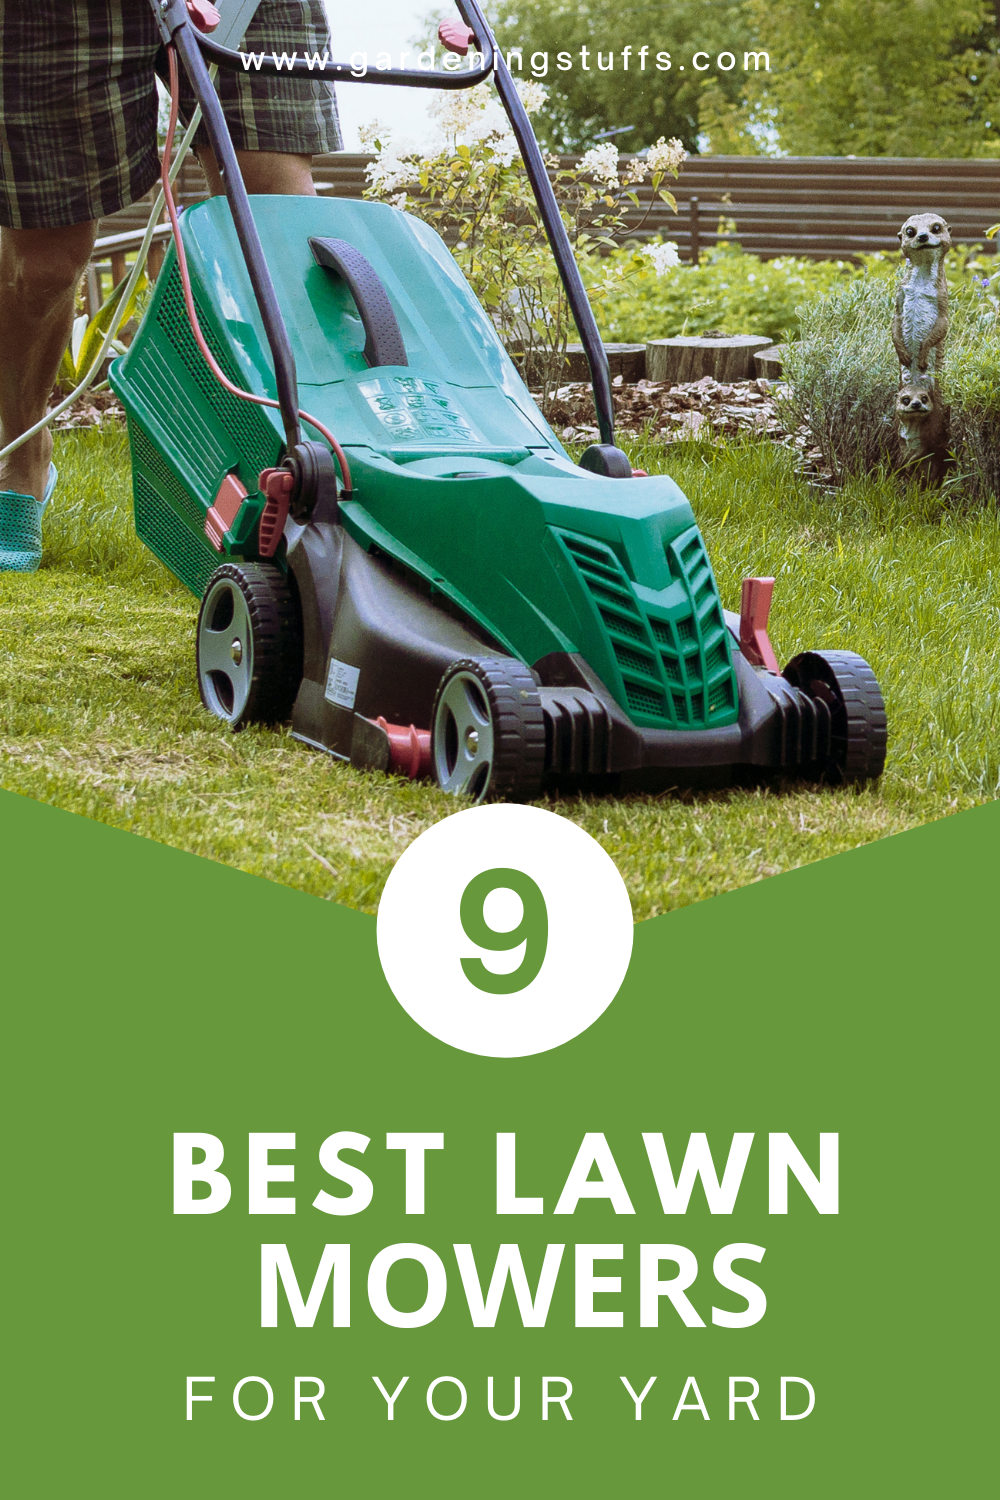 A lawn mower is a homeowner’s not-so-secret tool for keeping the lawn well-maintained. The wrong kind of mower may double the work and give you nothing but frustrations. But, the right kind will not only help you make your lawn healthy but it can also help you finish mowing it quicker. Check out our guide that will help you get the best lawn mower.